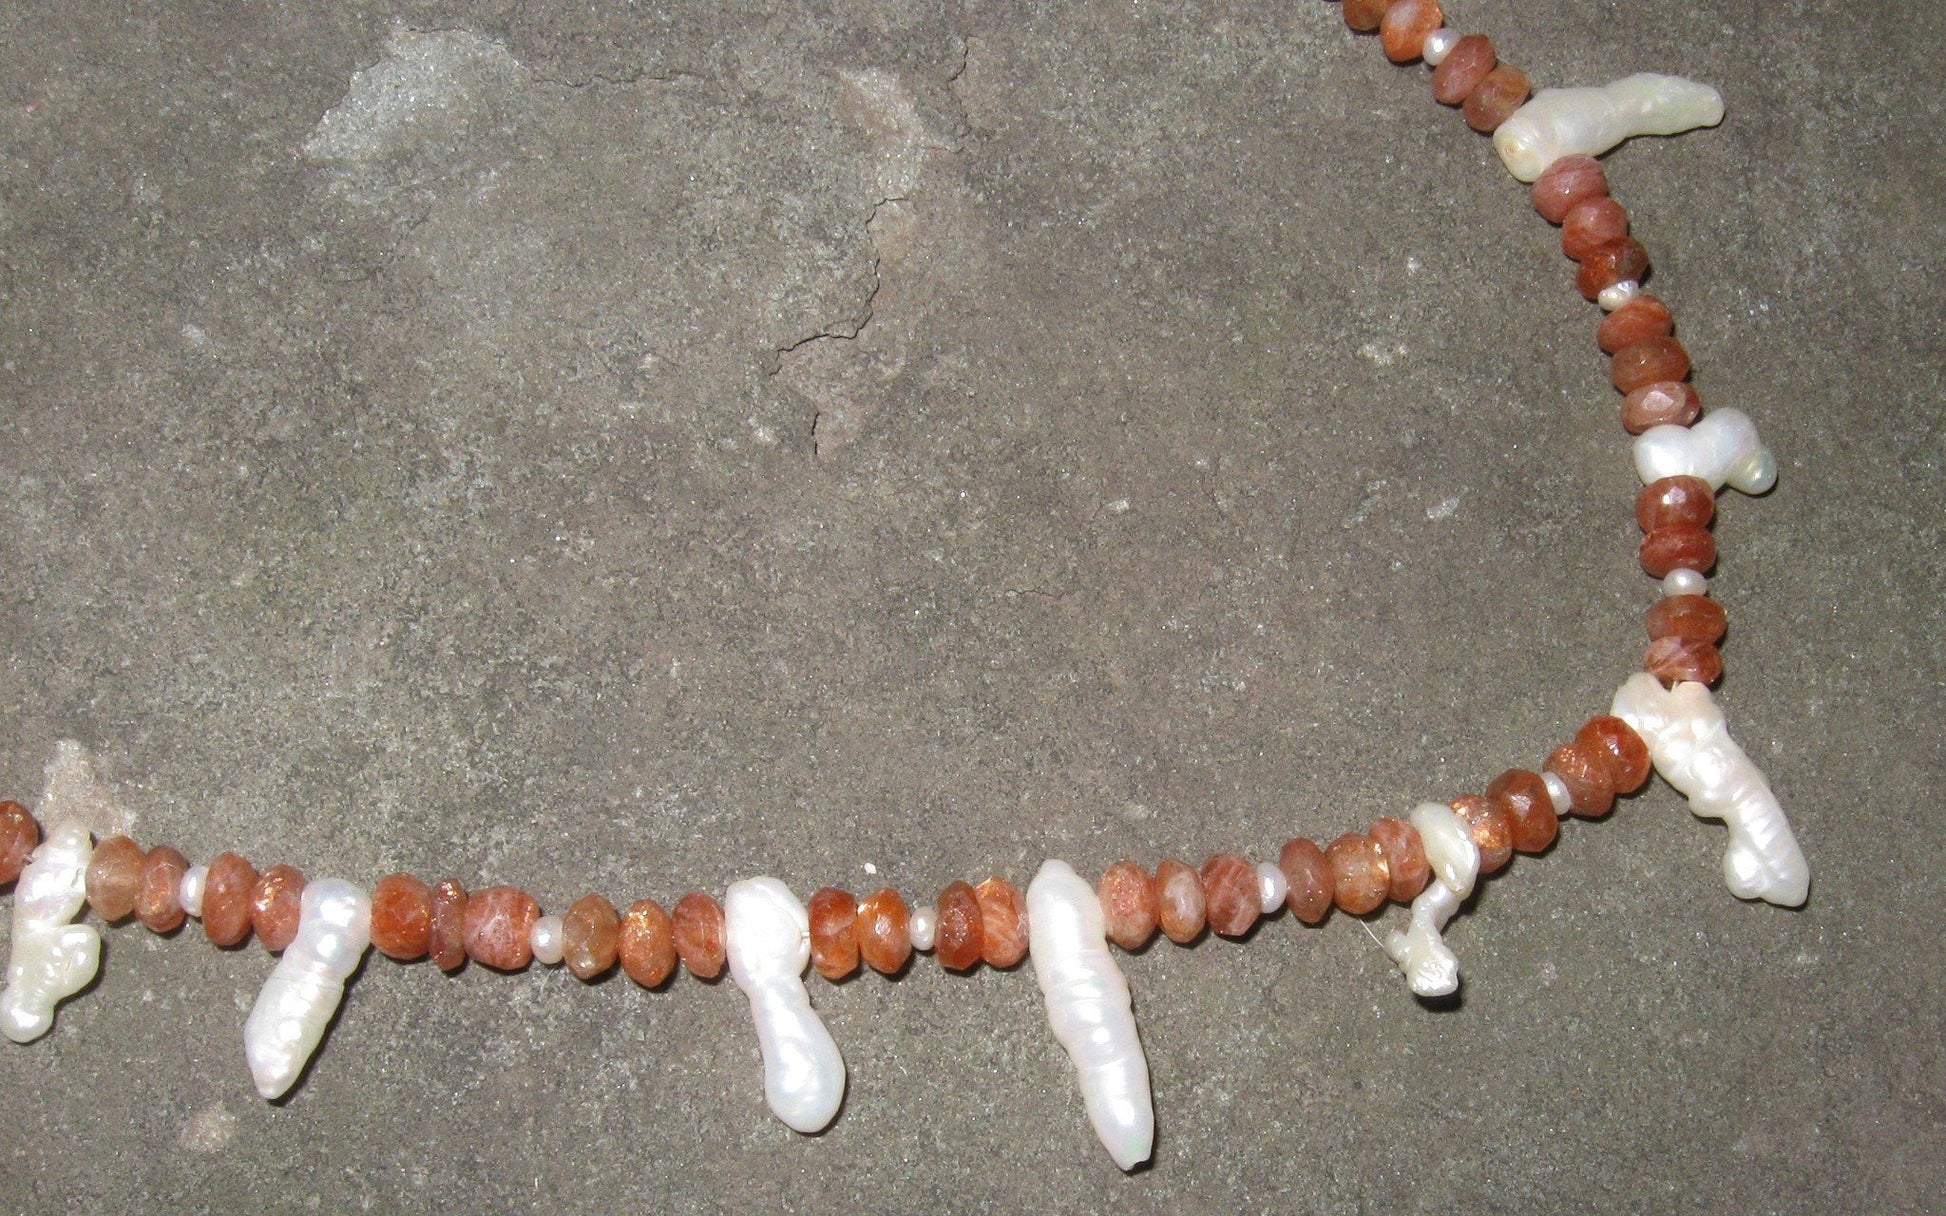 Fire & Ice - Sunstone and Freshwater Pearls | Of Coins & Crystals